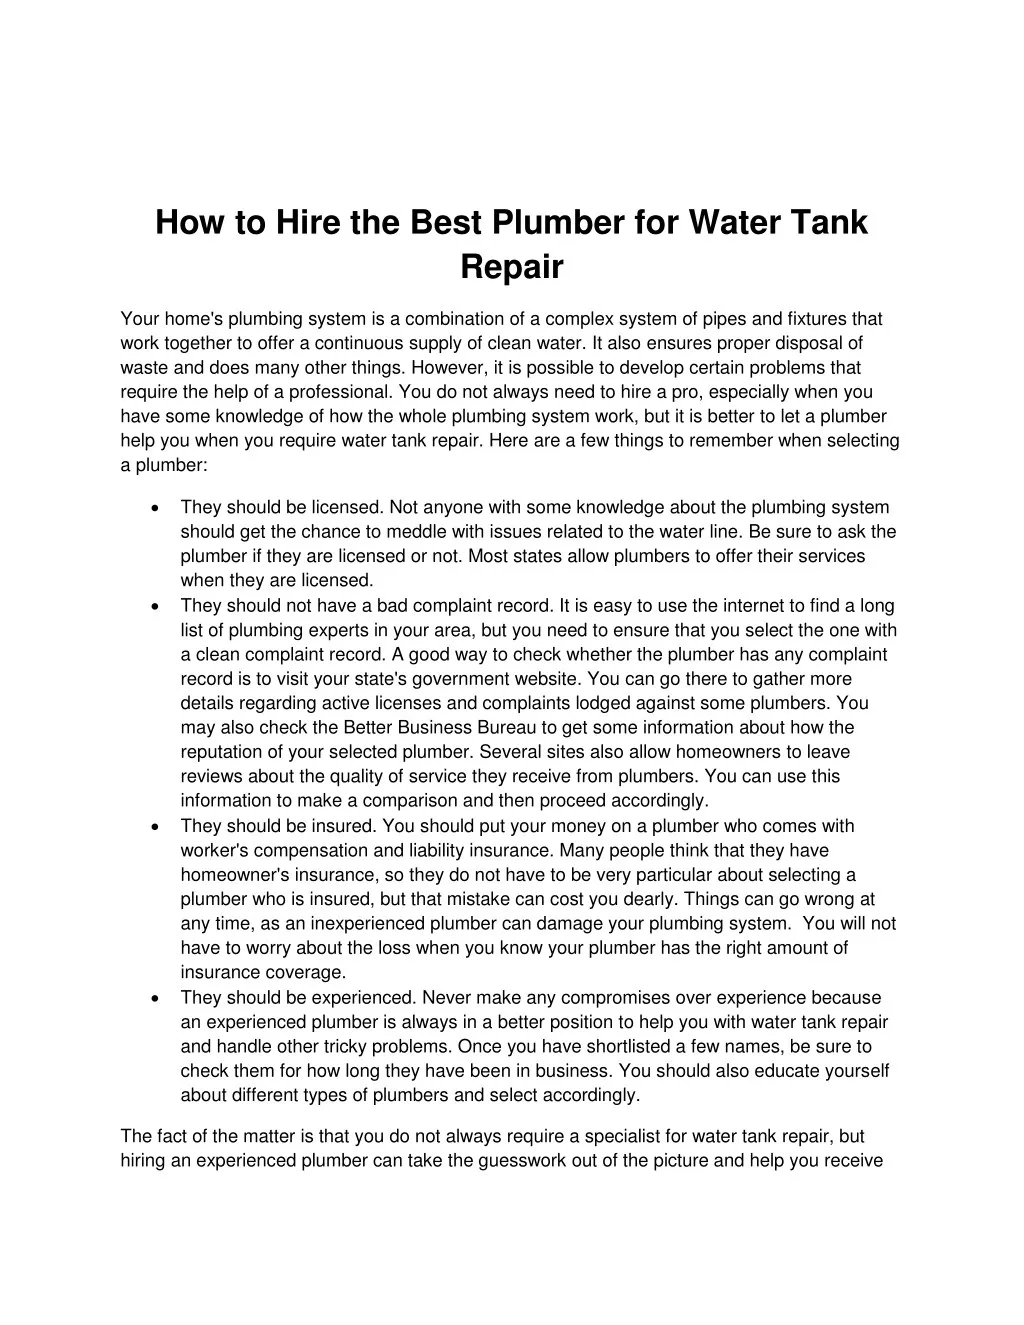 how to hire the best plumber for water tank repair